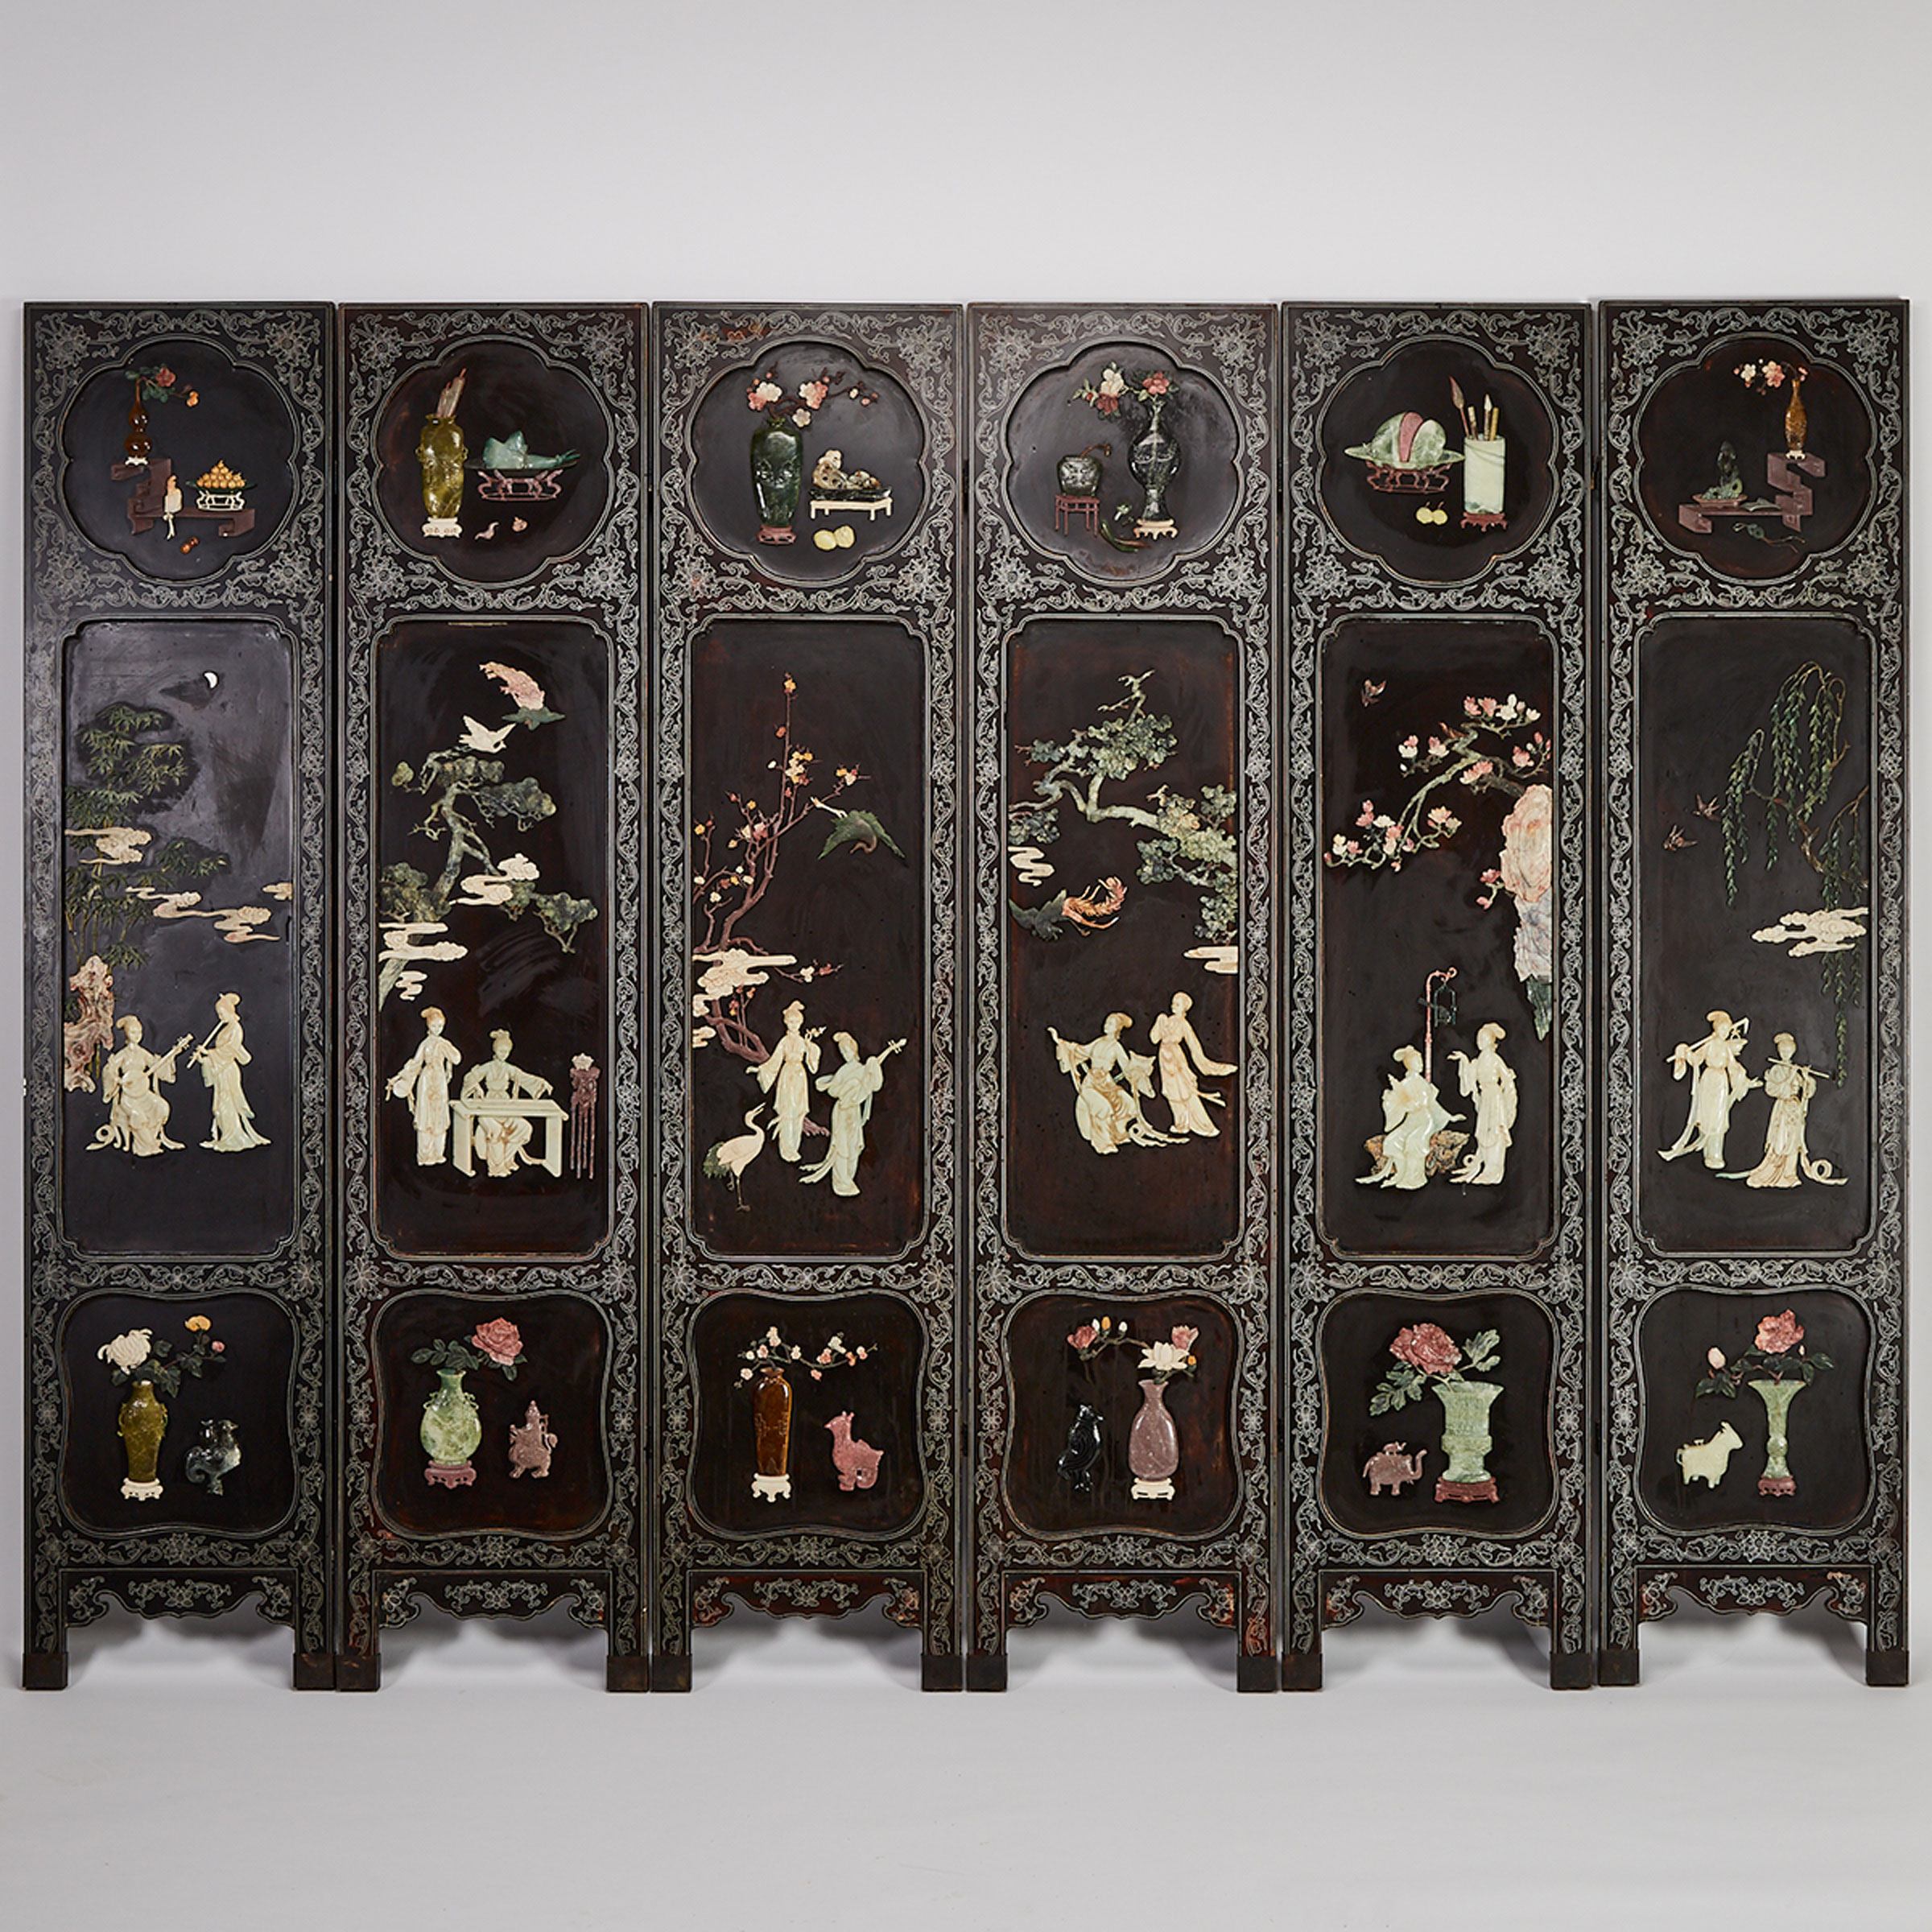 A Six-Panel Jade and Hardstone Inlaid Lacquer Floor Screen, Early 20th Century